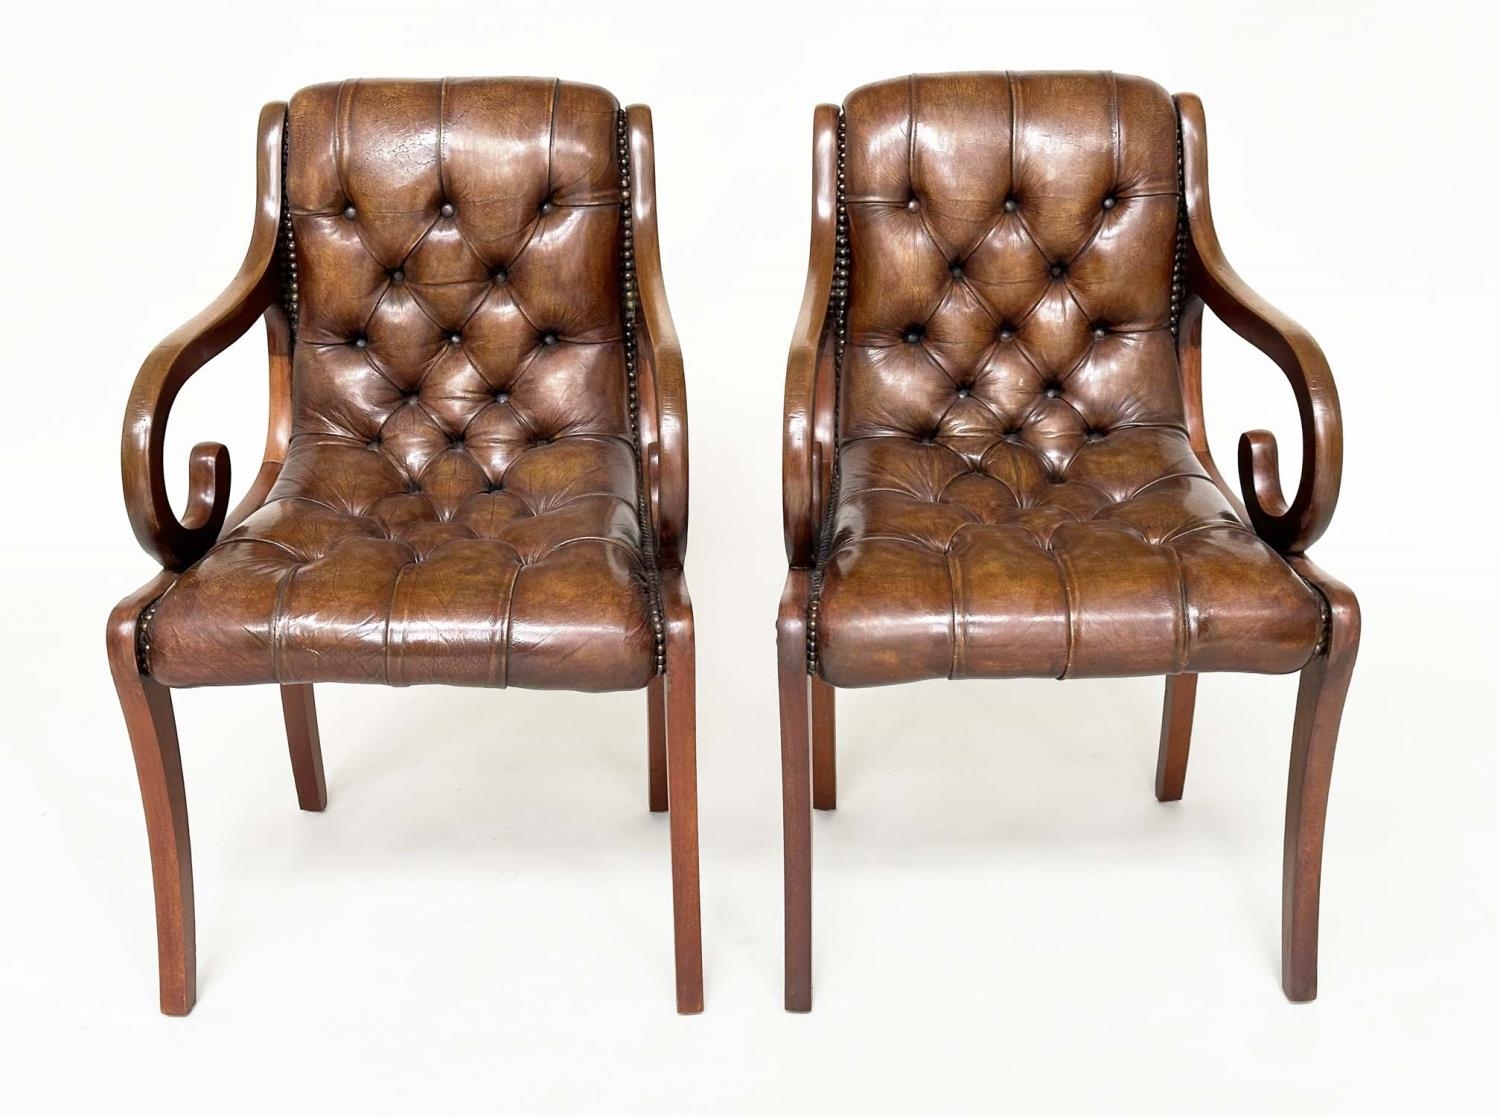 LIBRARY ARMCHAIRS, a pair, Georgian style buttoned soft natural antique brown leather upholstered